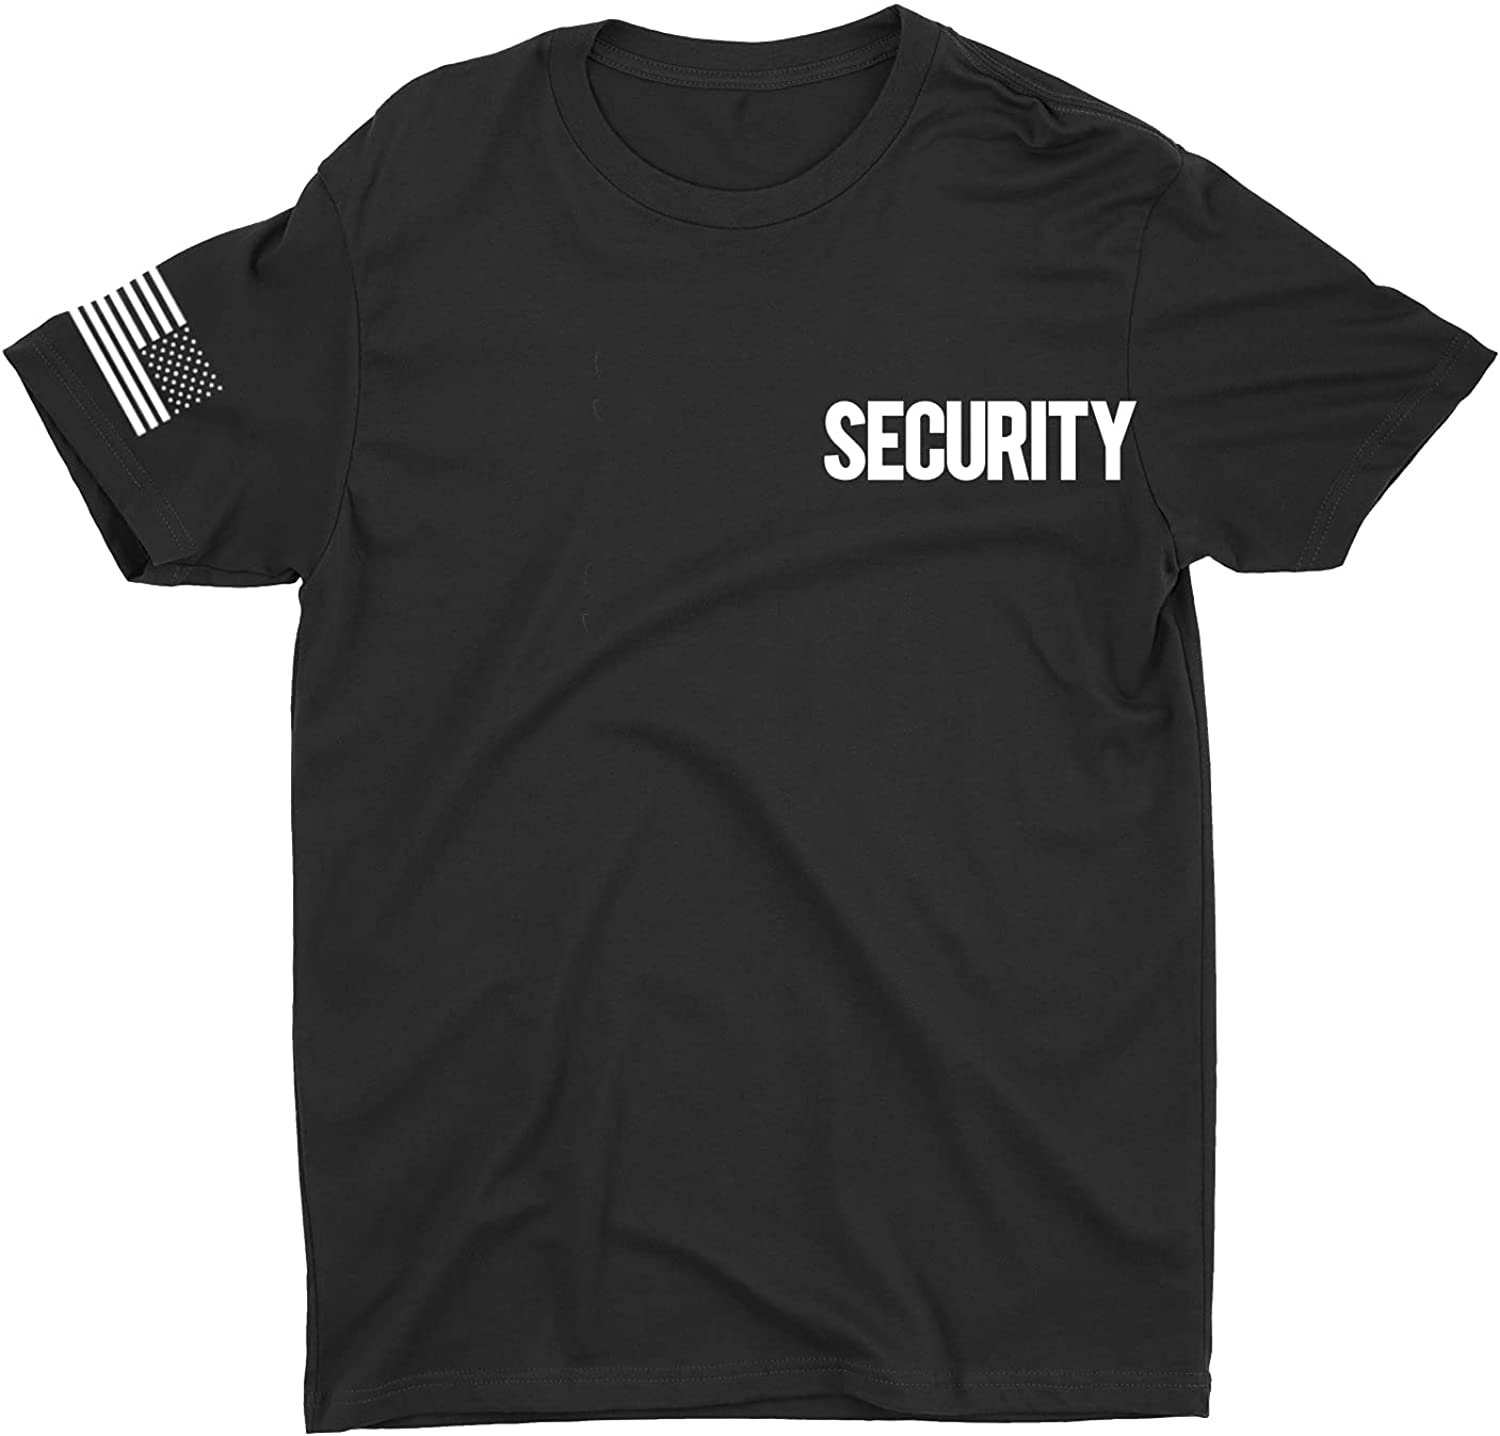 Men's Security T-Shirt USA Flag (Black & White, Chest, Sleeve and Back Print)